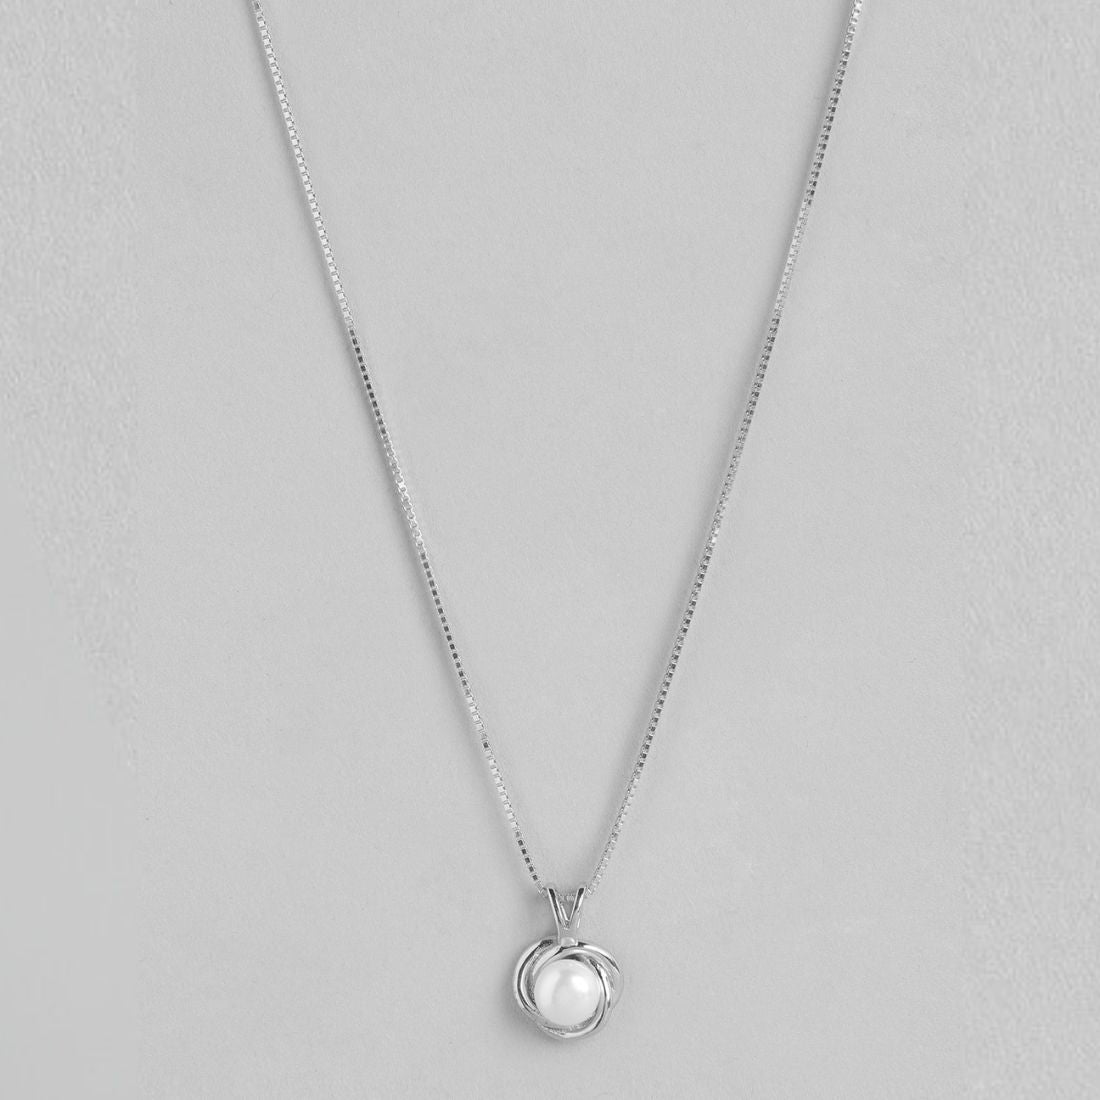 Pearlescent Radiance Charm Rhodium-Plated 925 Sterling Silver Pendant with Chain